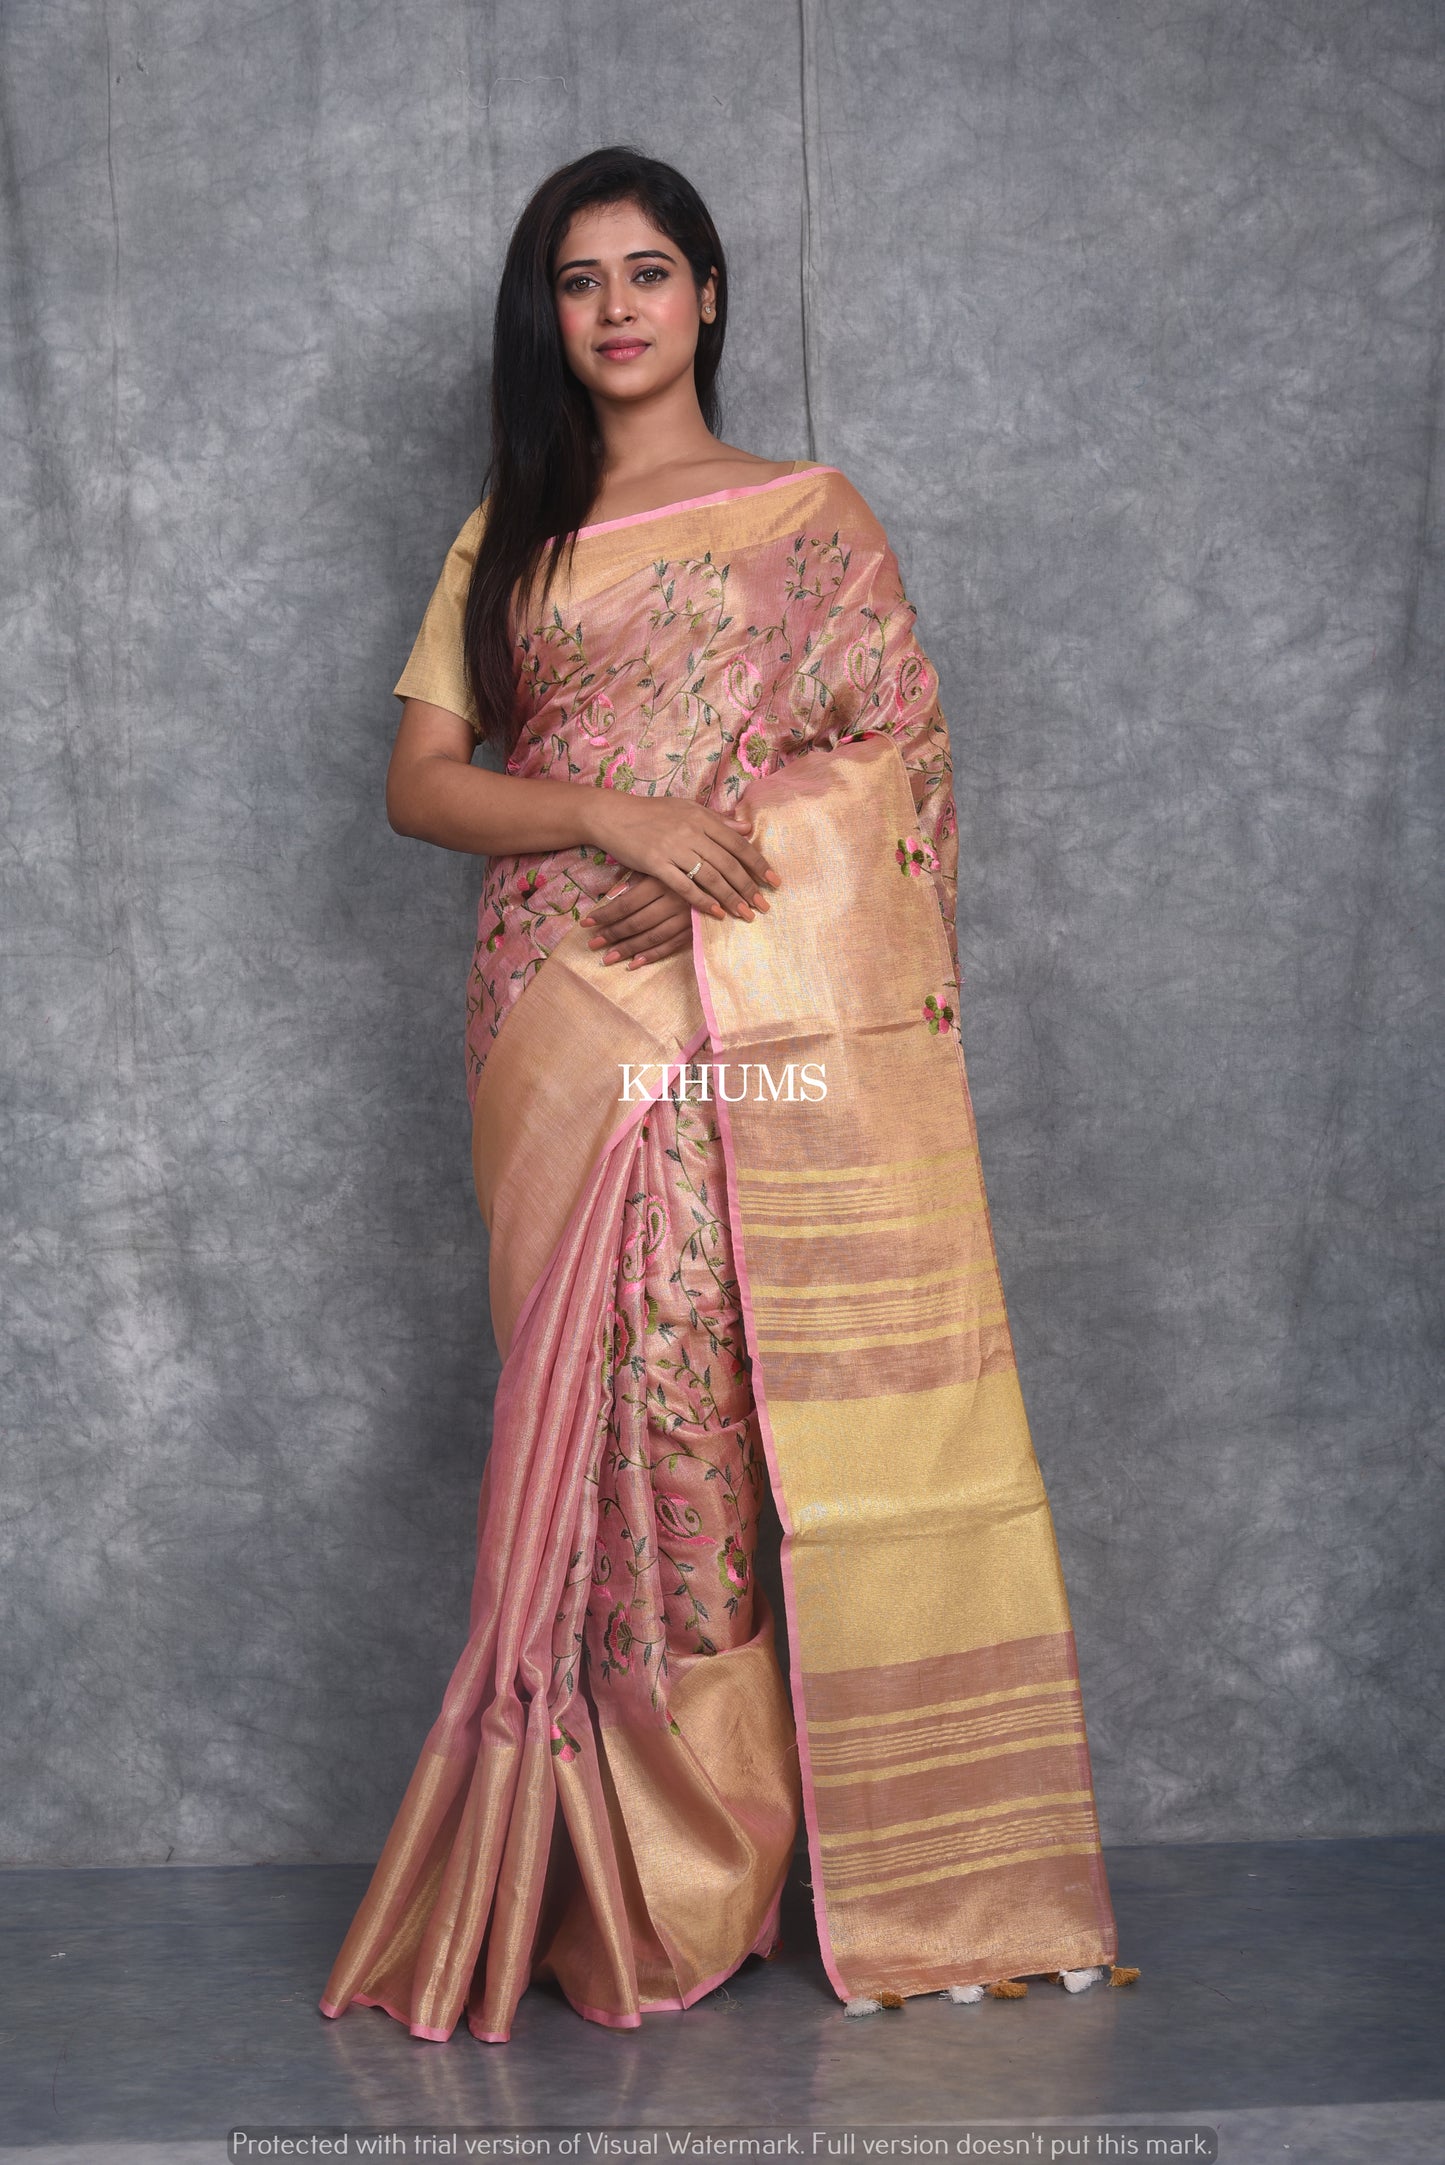 Pink and Gold Tissue Linen Saree with Floral Embroidery | KIHUMS Saree